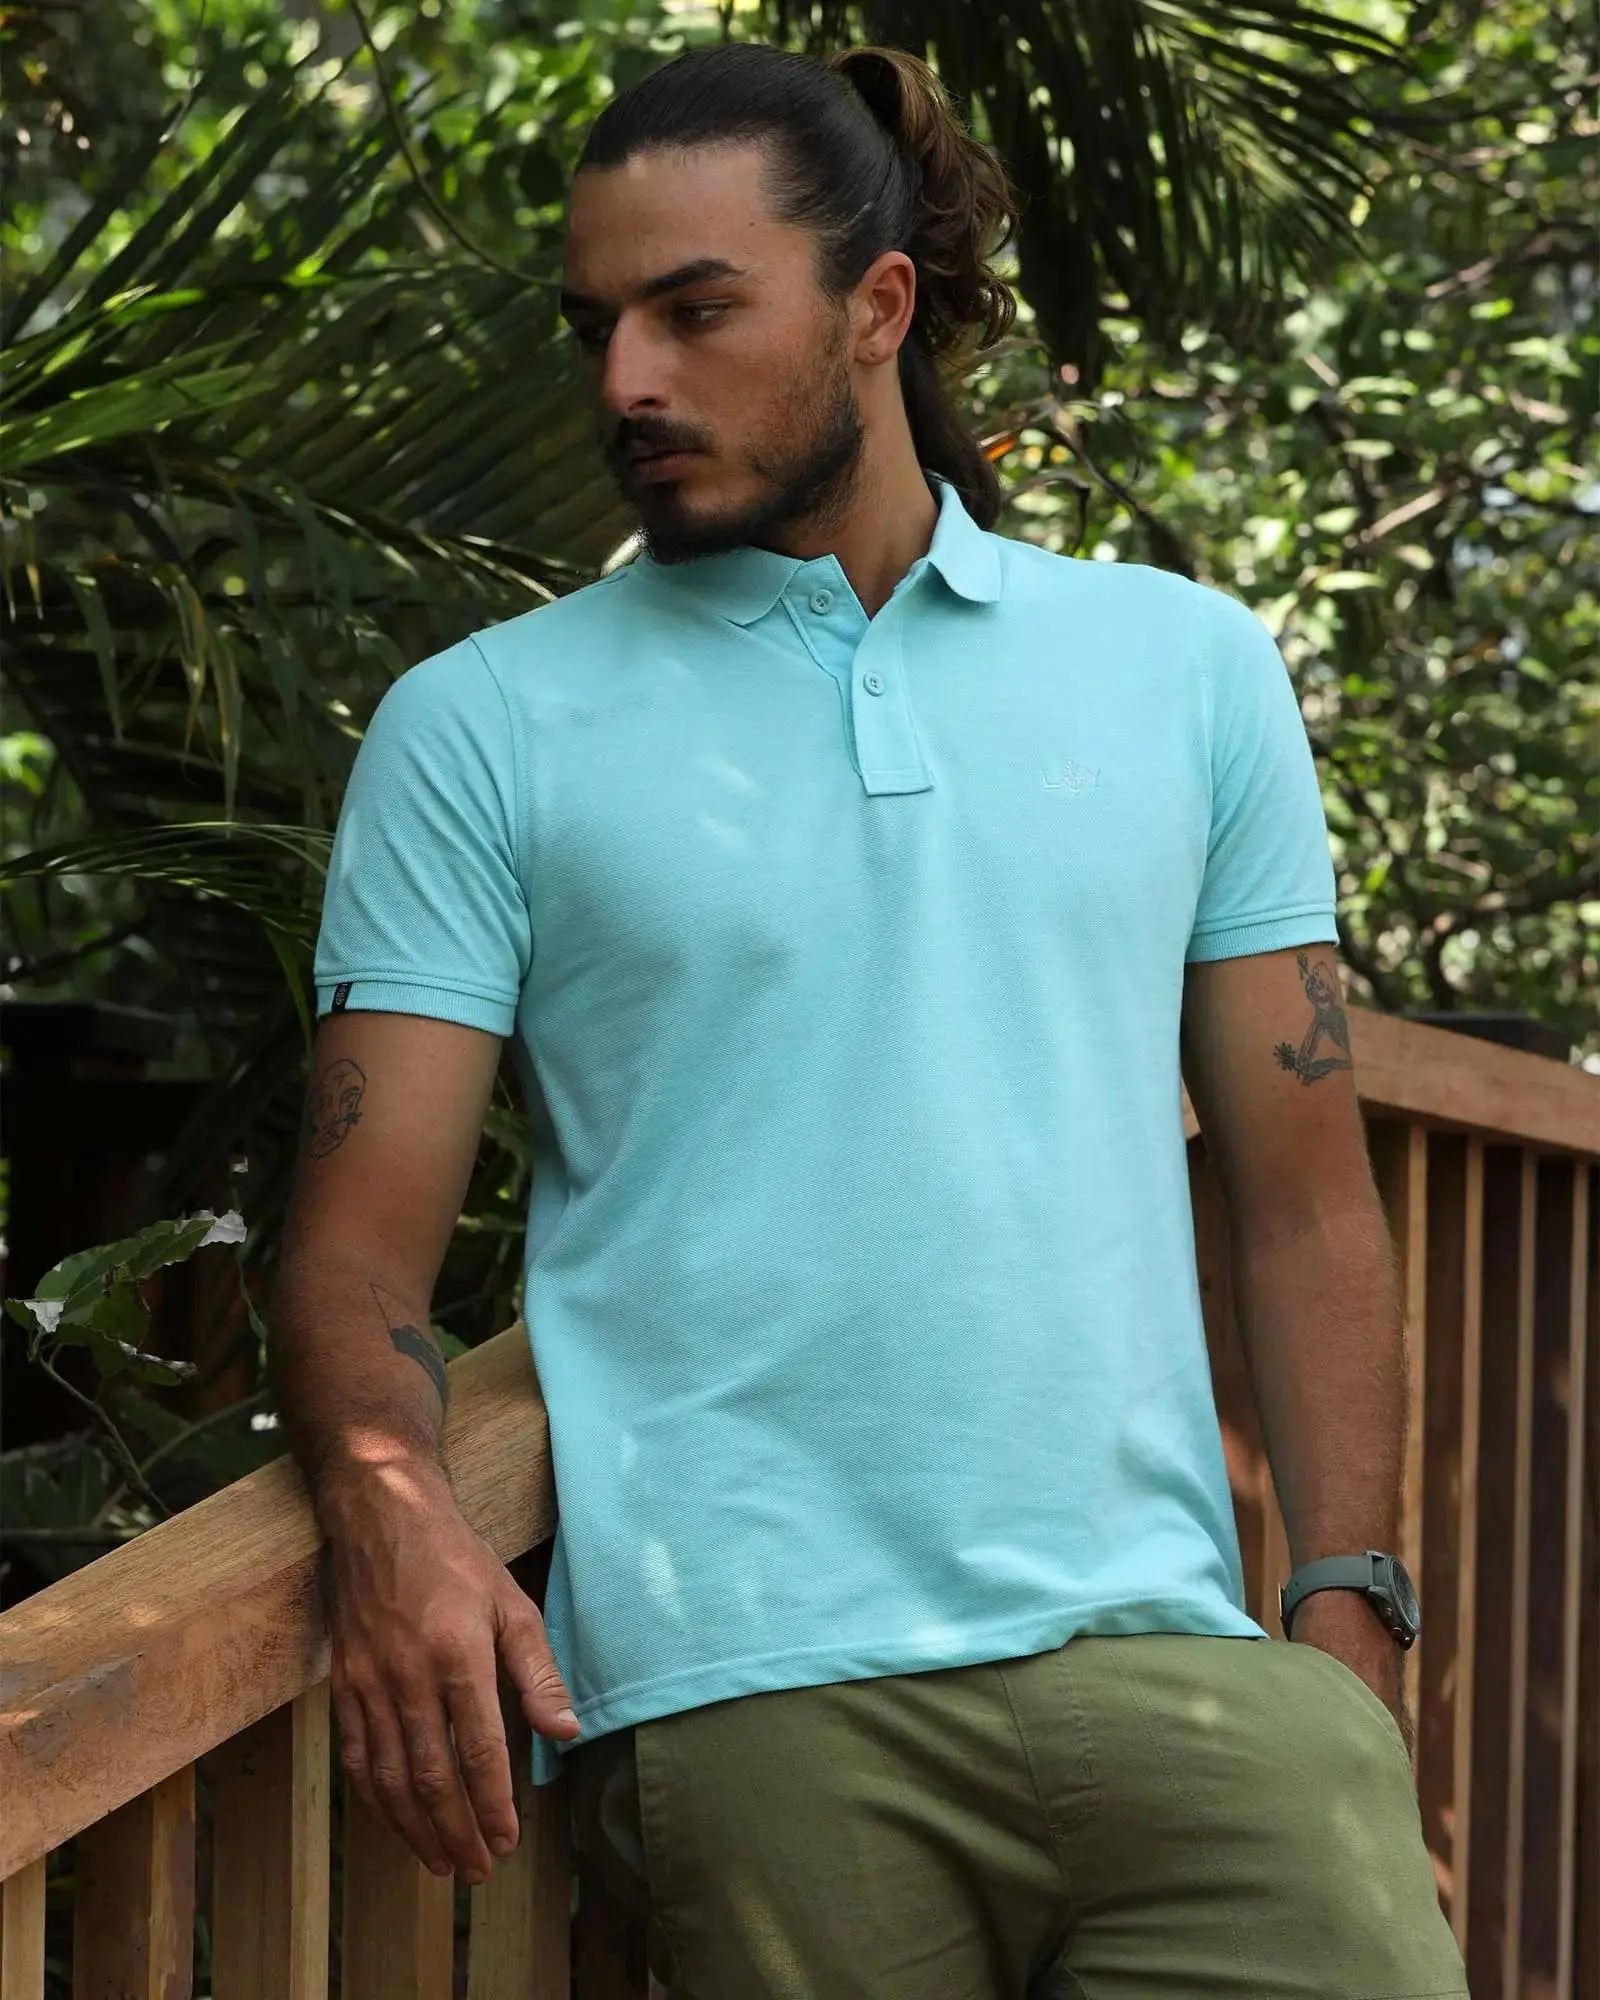 LCY London | Stand Up Basic - Men&#39;s Short Sleeved Polo LCY London